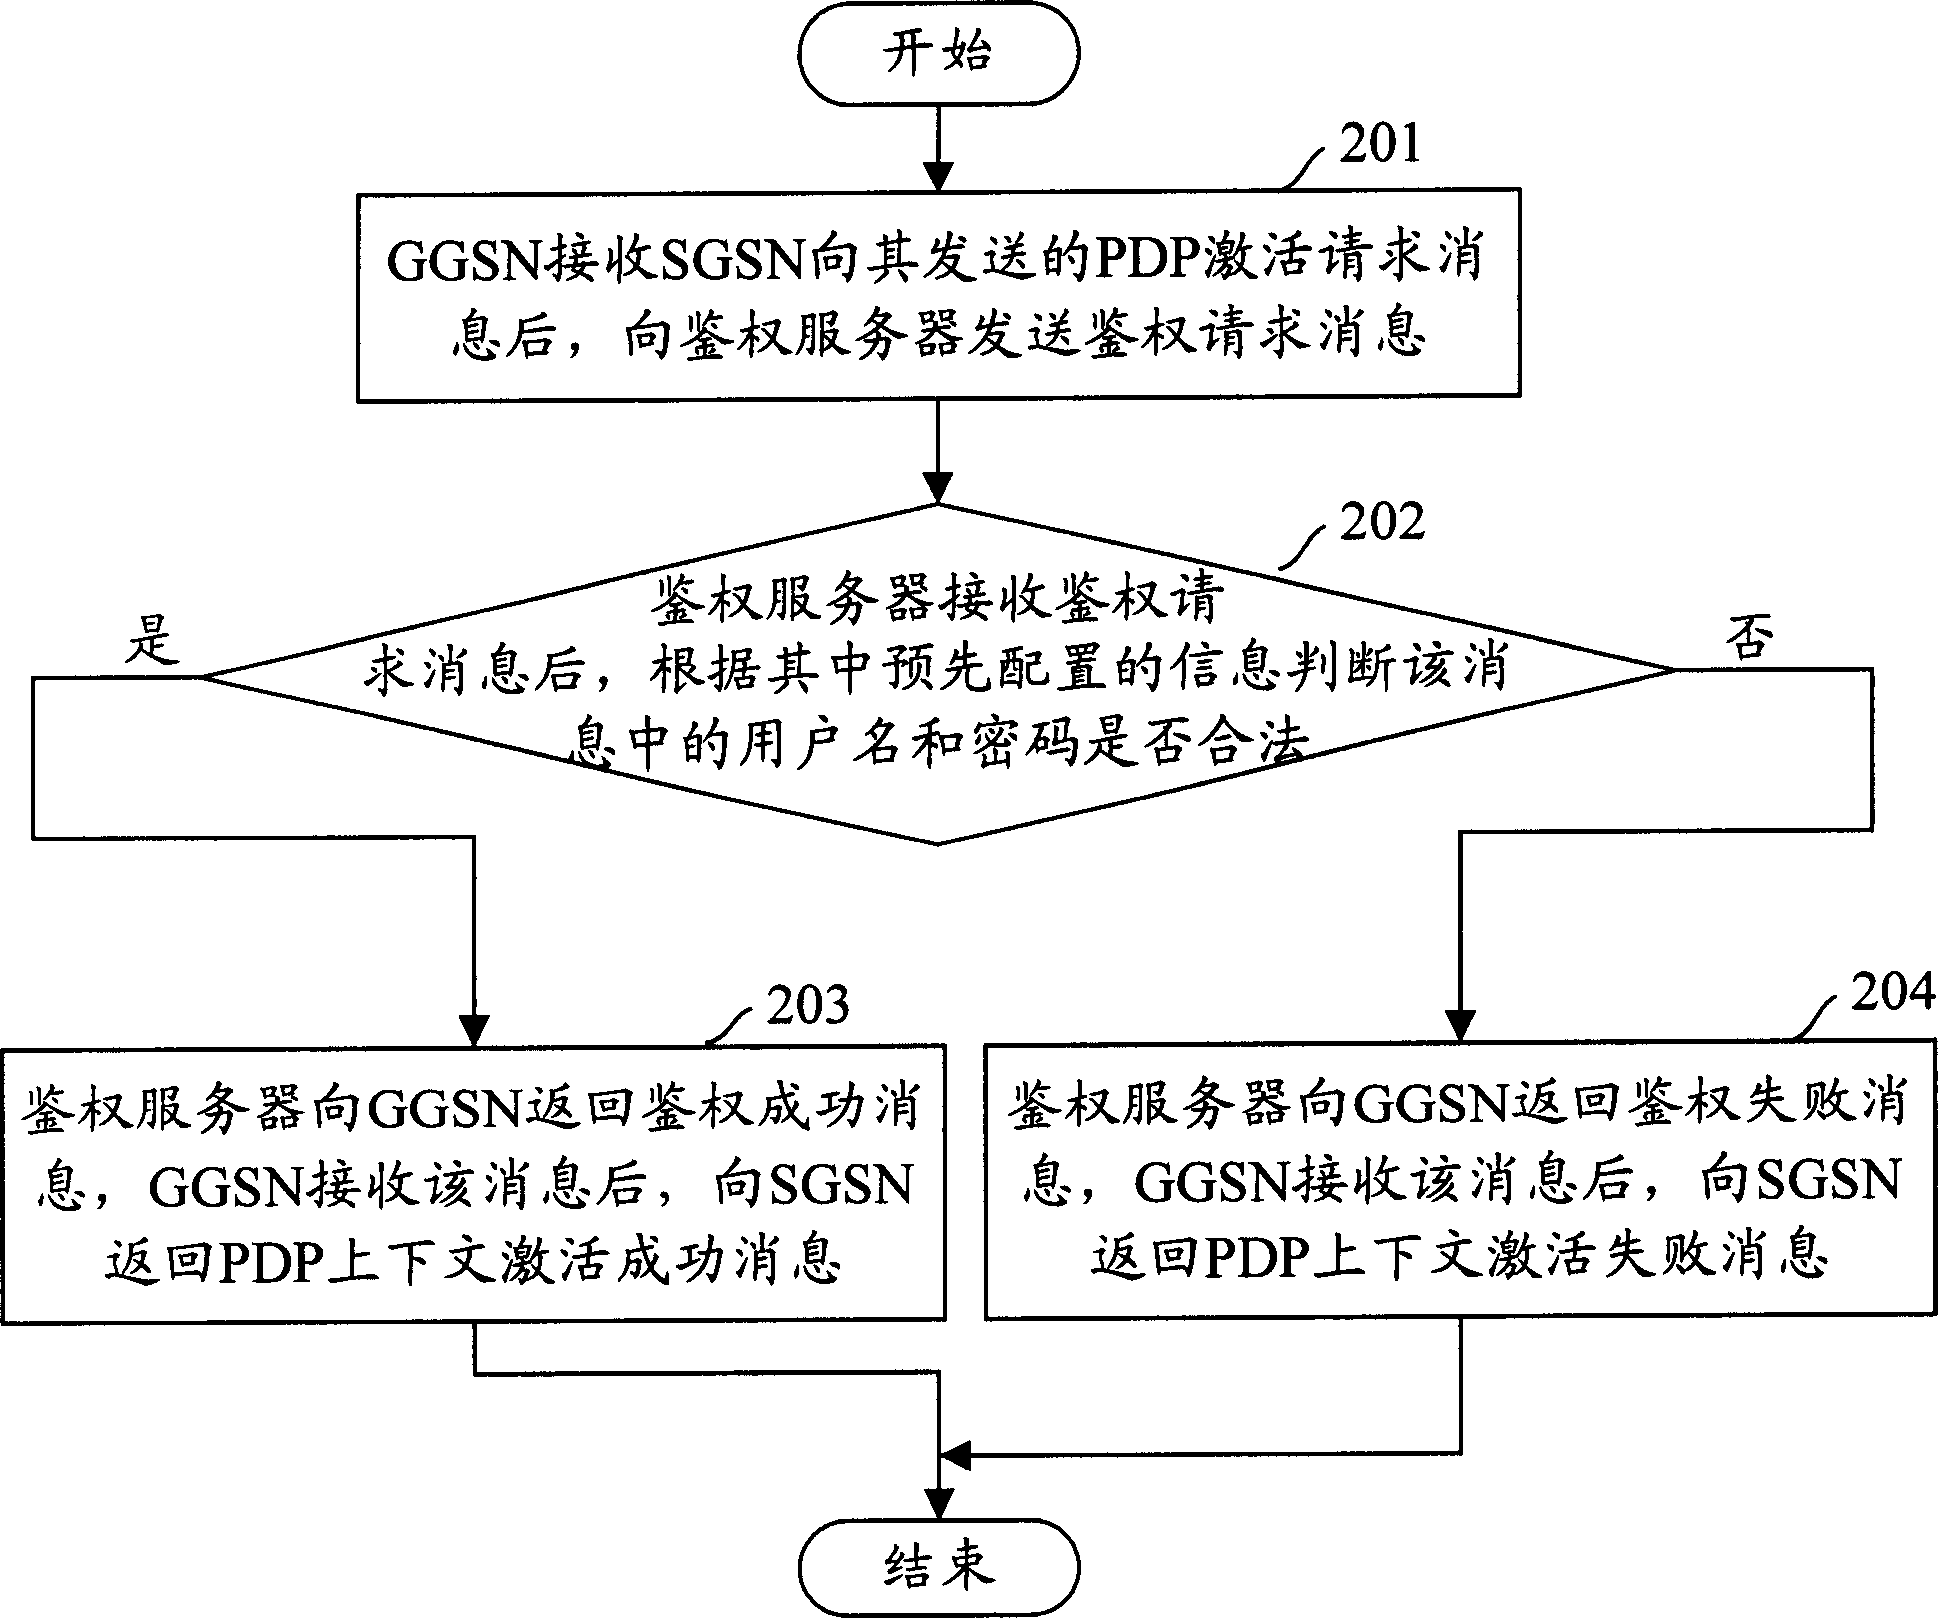 Method for identifying authority in wireless group business